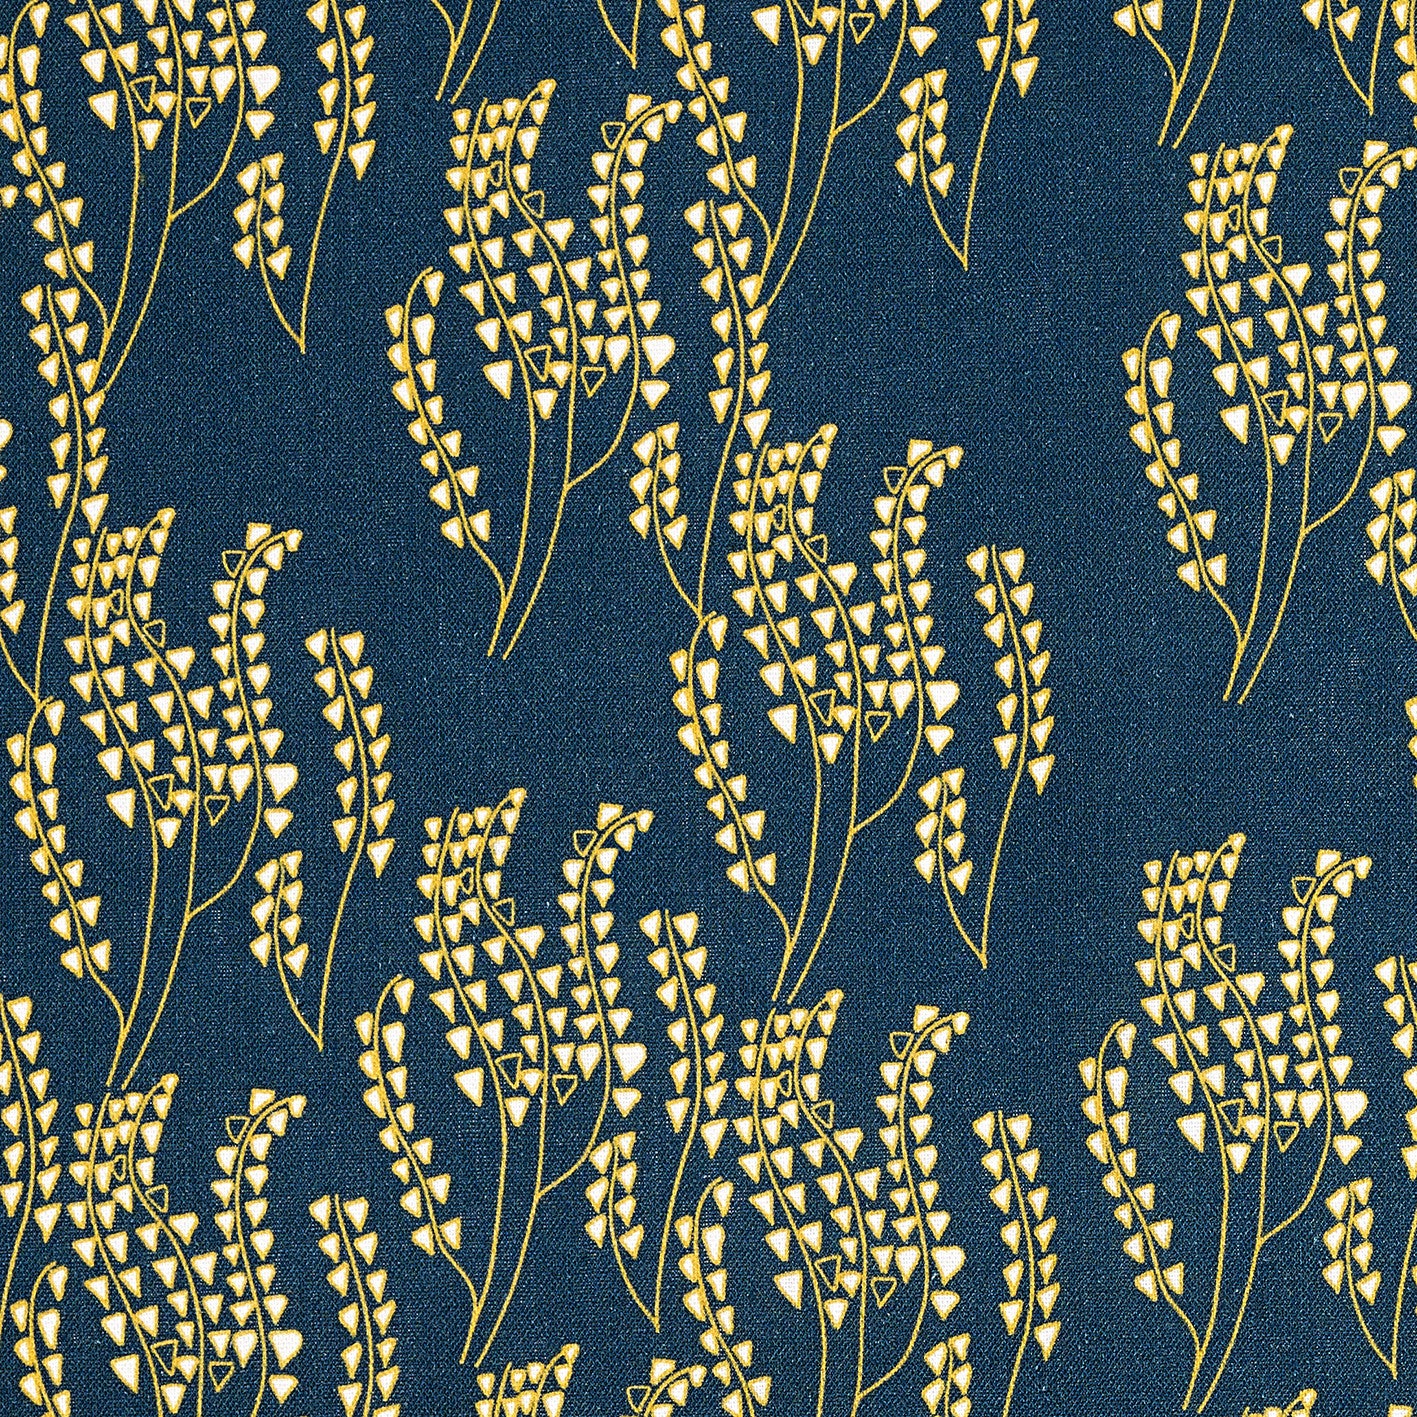 Maricopa Graphic Floral Pattern Cotton Linen Home Decor Fabric by the meter or by the yard for curtains, blinds or upholstery in Dark Petrol Blue / Maize Yellow ships from Canada worldwide (USA)